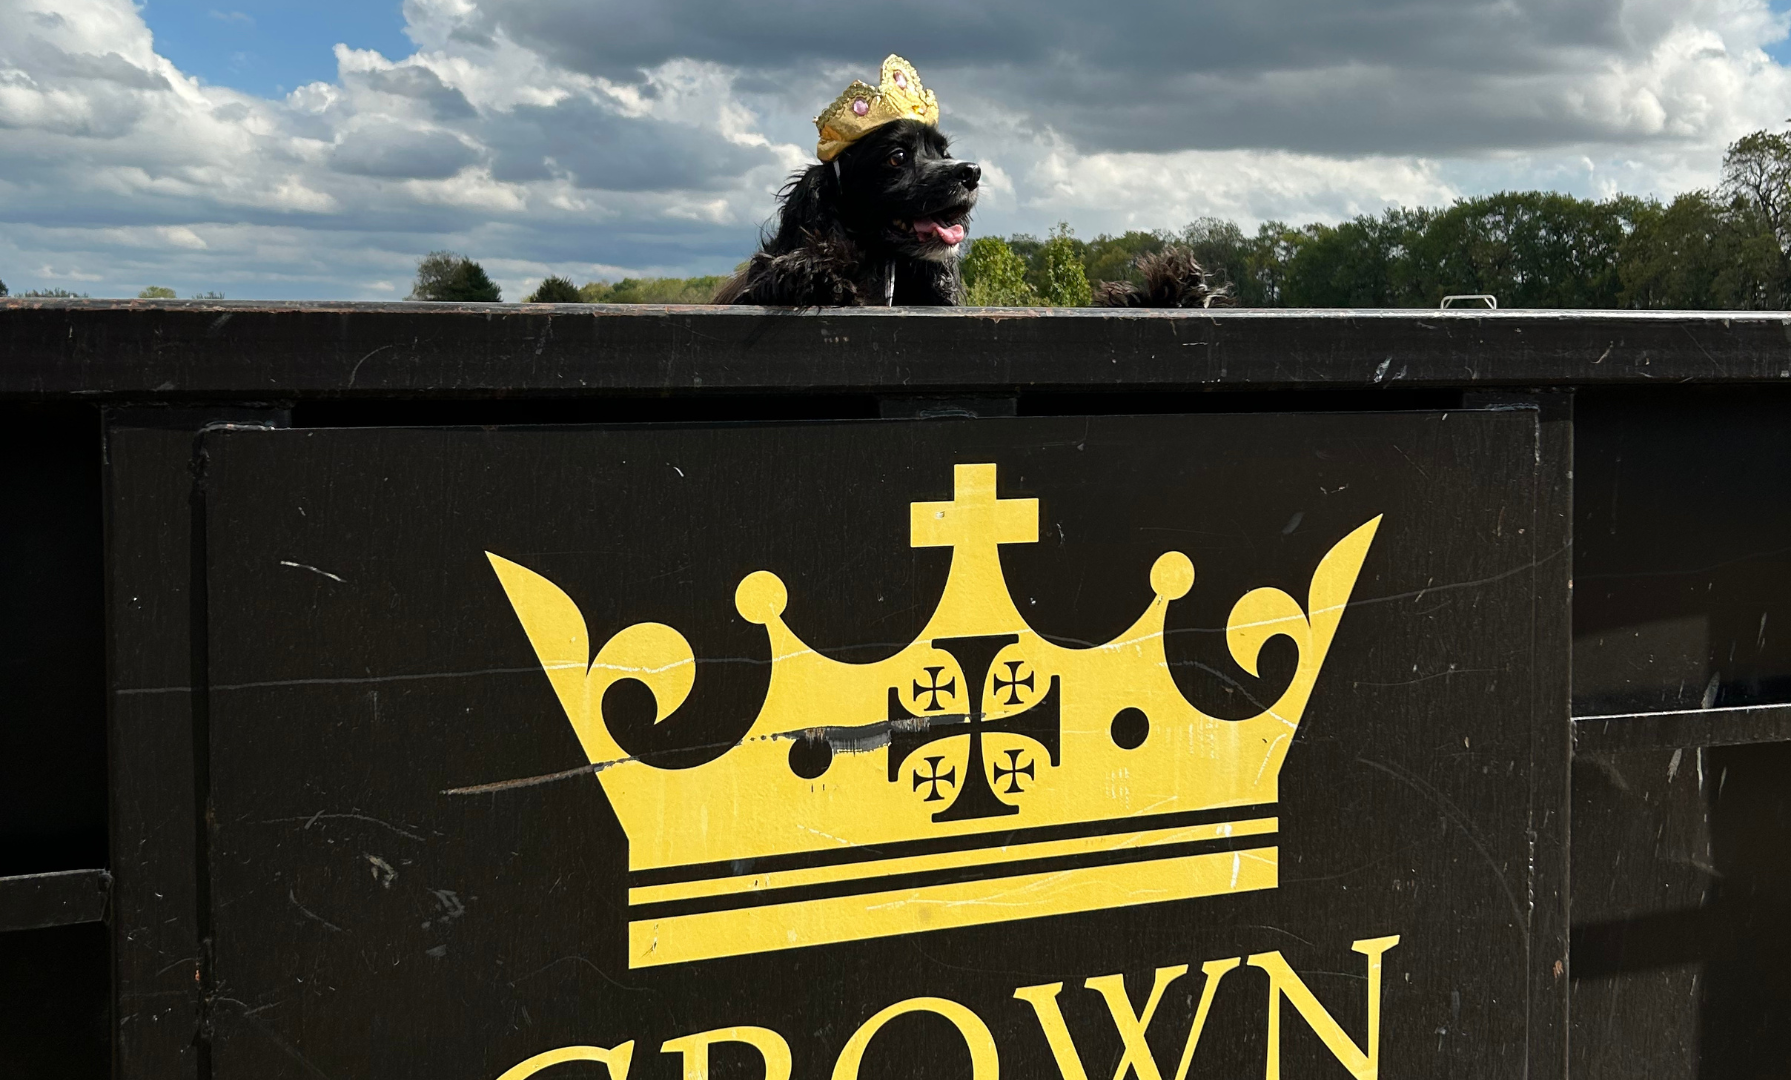 A dog wearing a crown is sitting in front of a sign that says crown